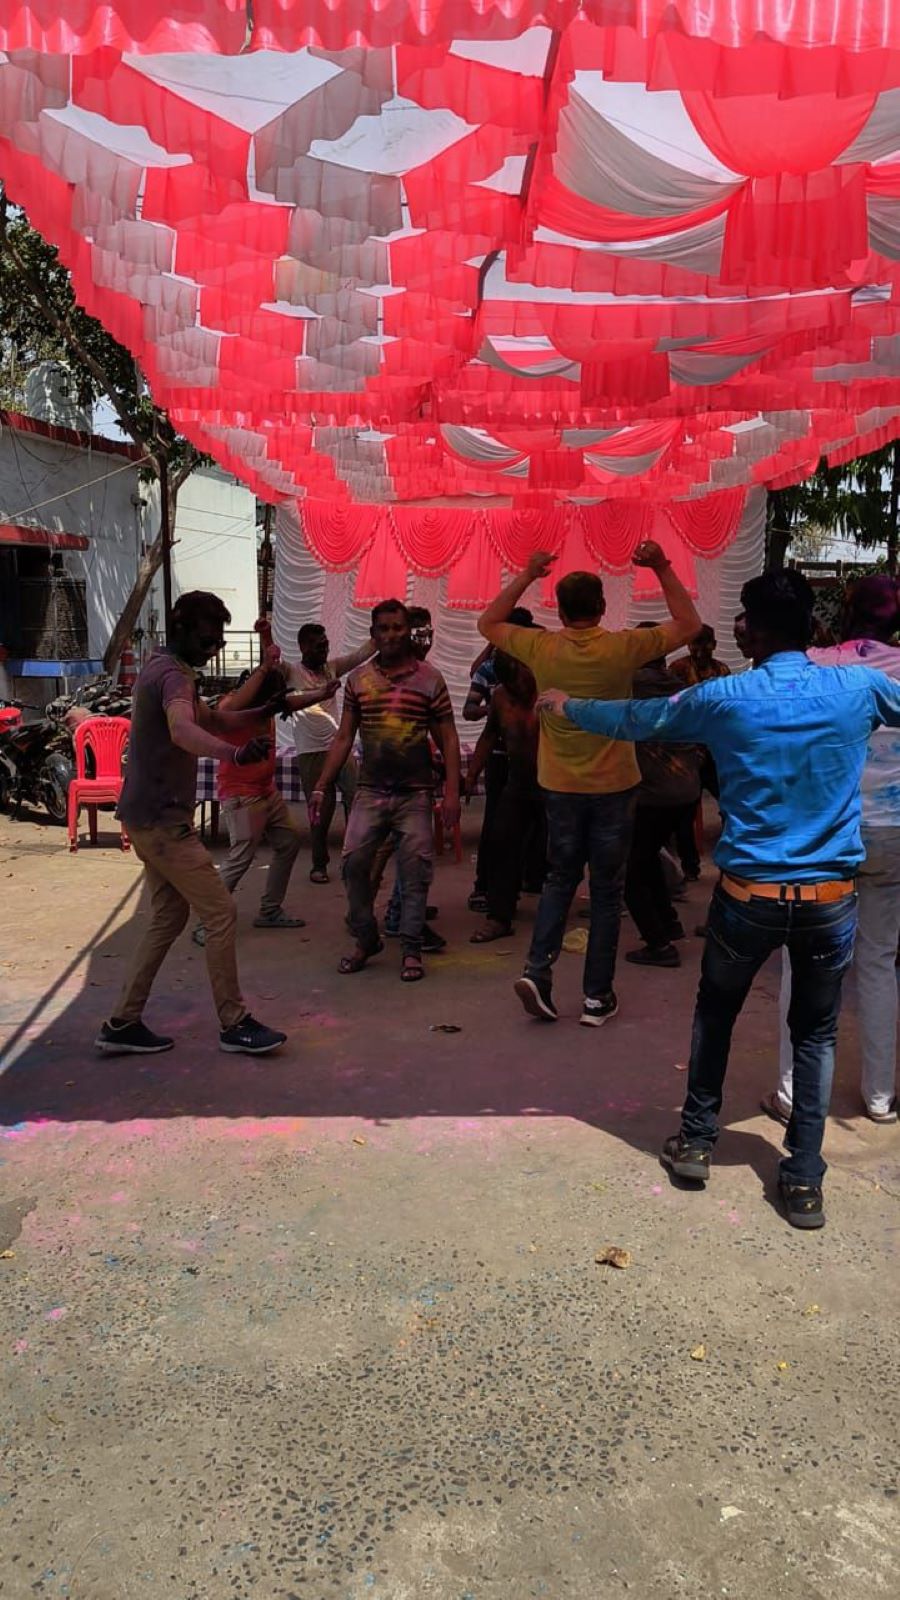 Police played Holi: applied color and gulal to each other, danced vigorously